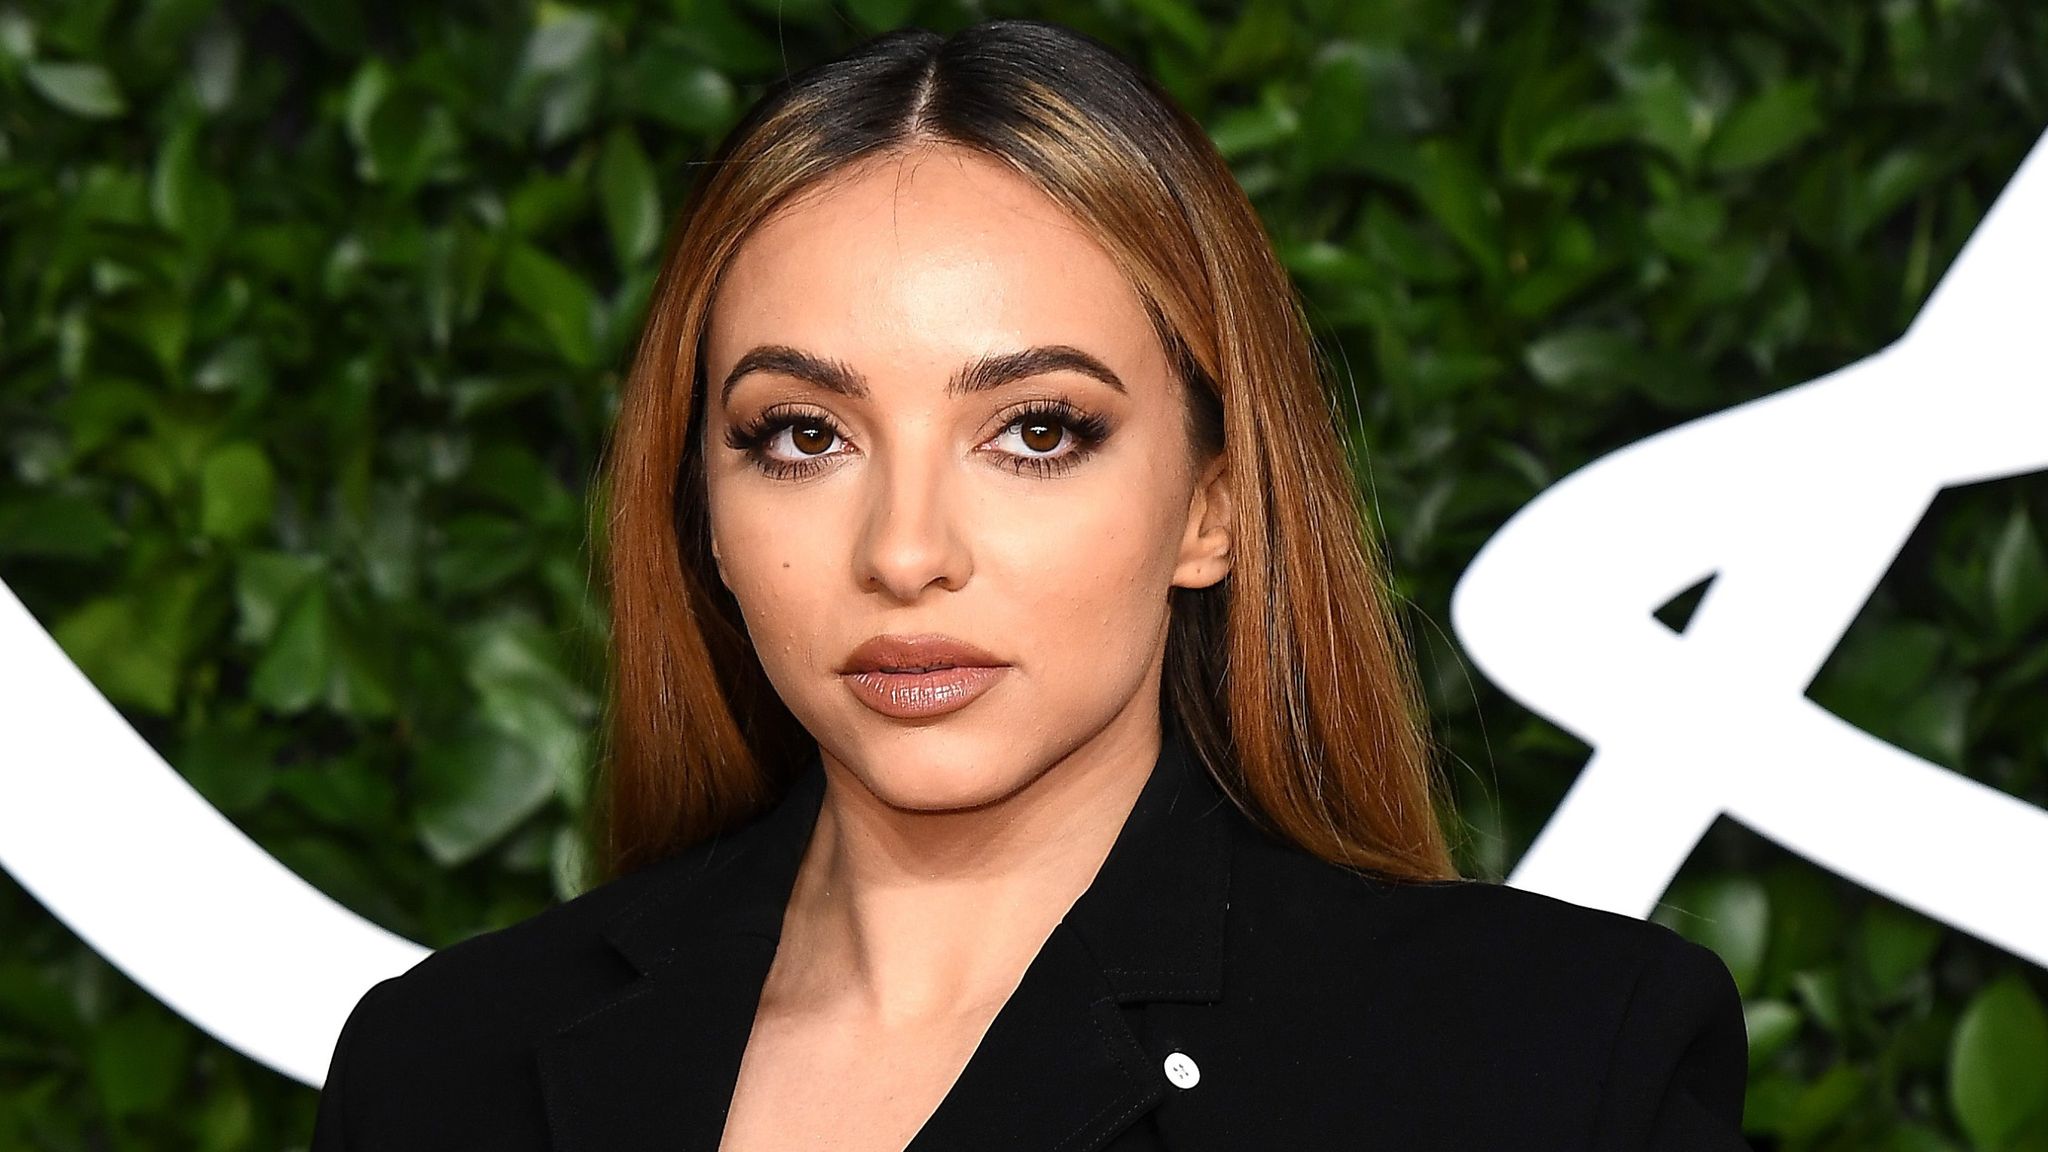 Little Mix's Jade Thirlwall shows off her new blue hair - wide 4